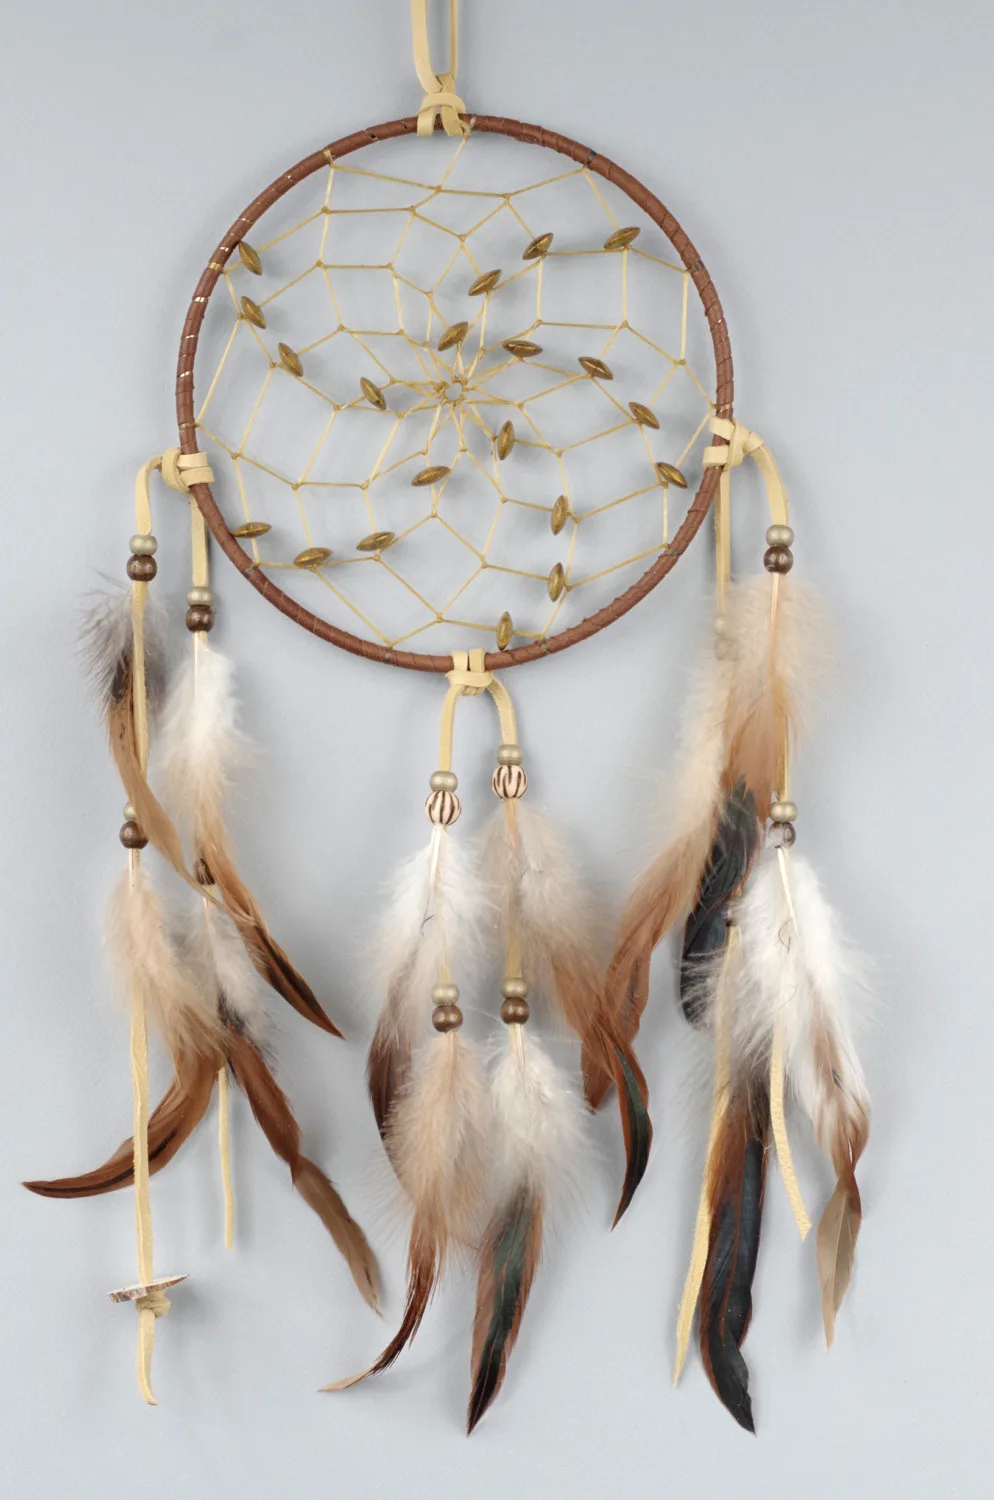 Dreamcatcher from MetisArts on Etsy